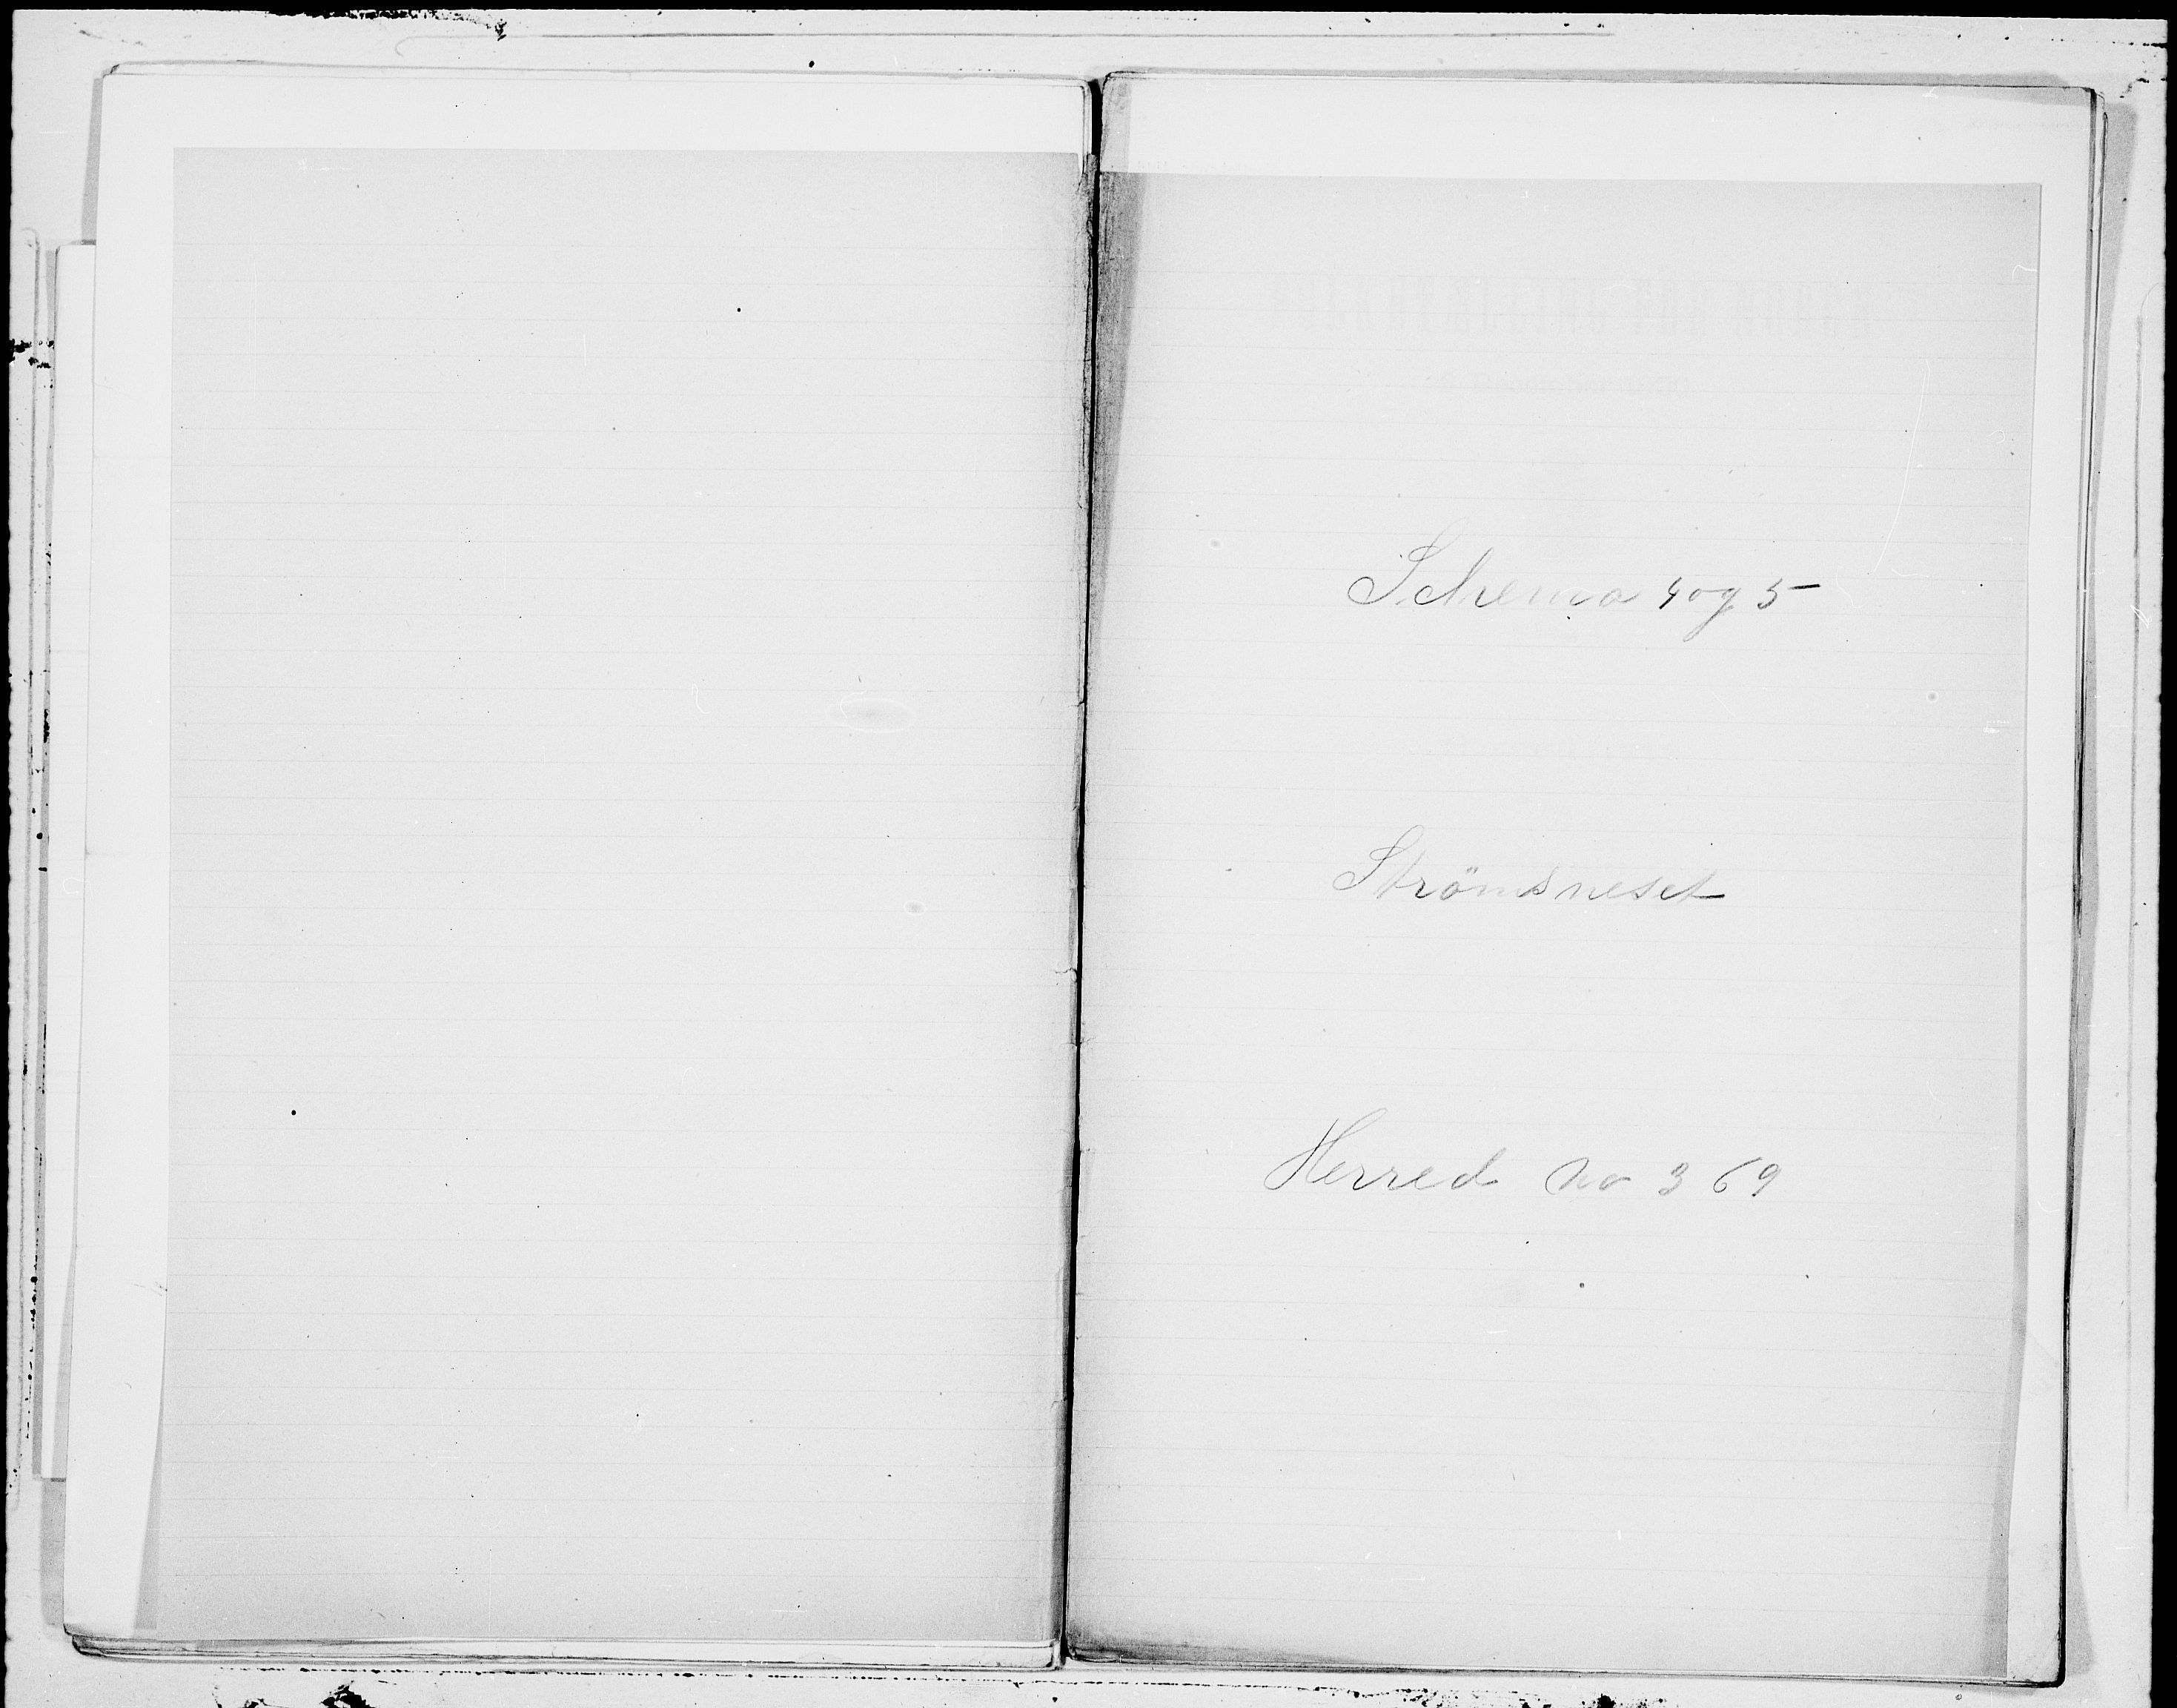 SAT, 1900 census for Straumsnes, 1900, p. 1